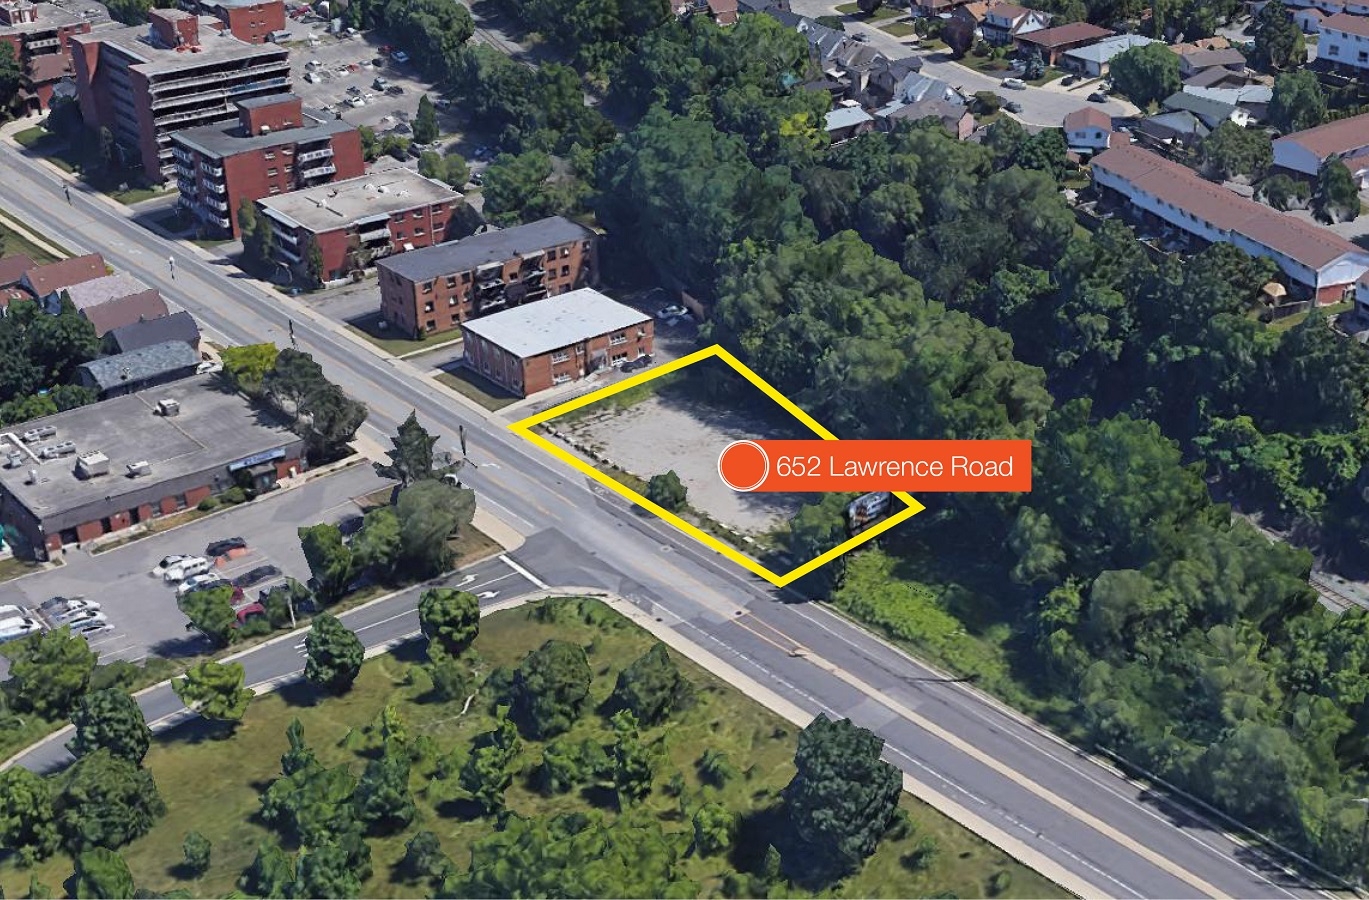 652 Lawrence Road Property Location 